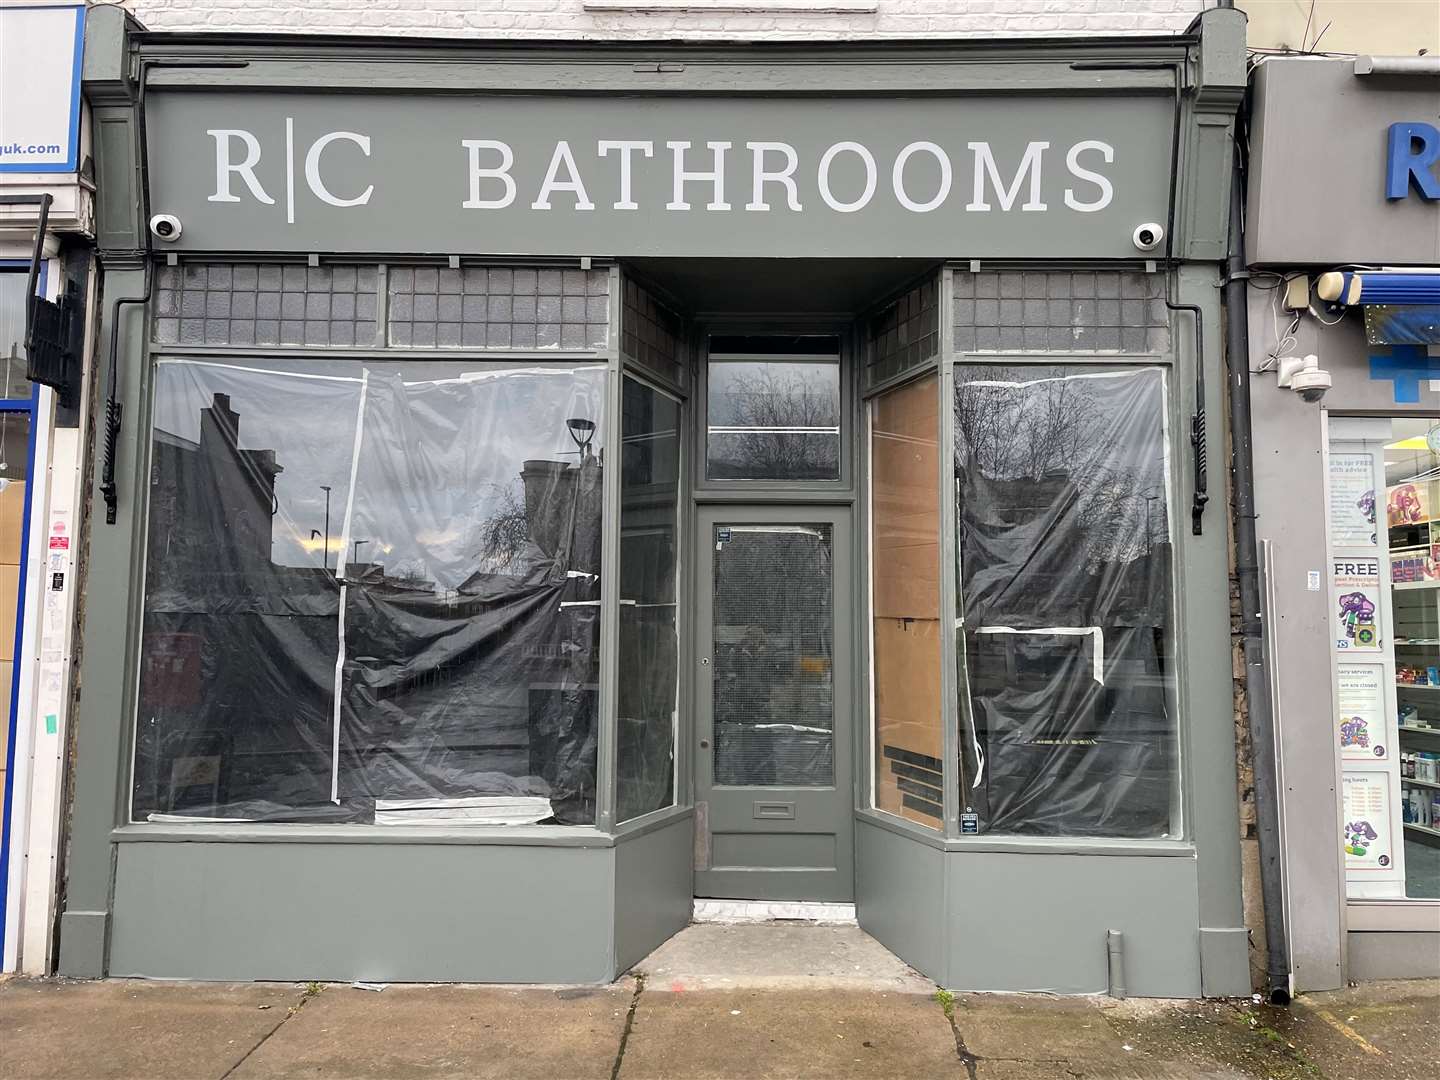 RC Bathrooms is set to open